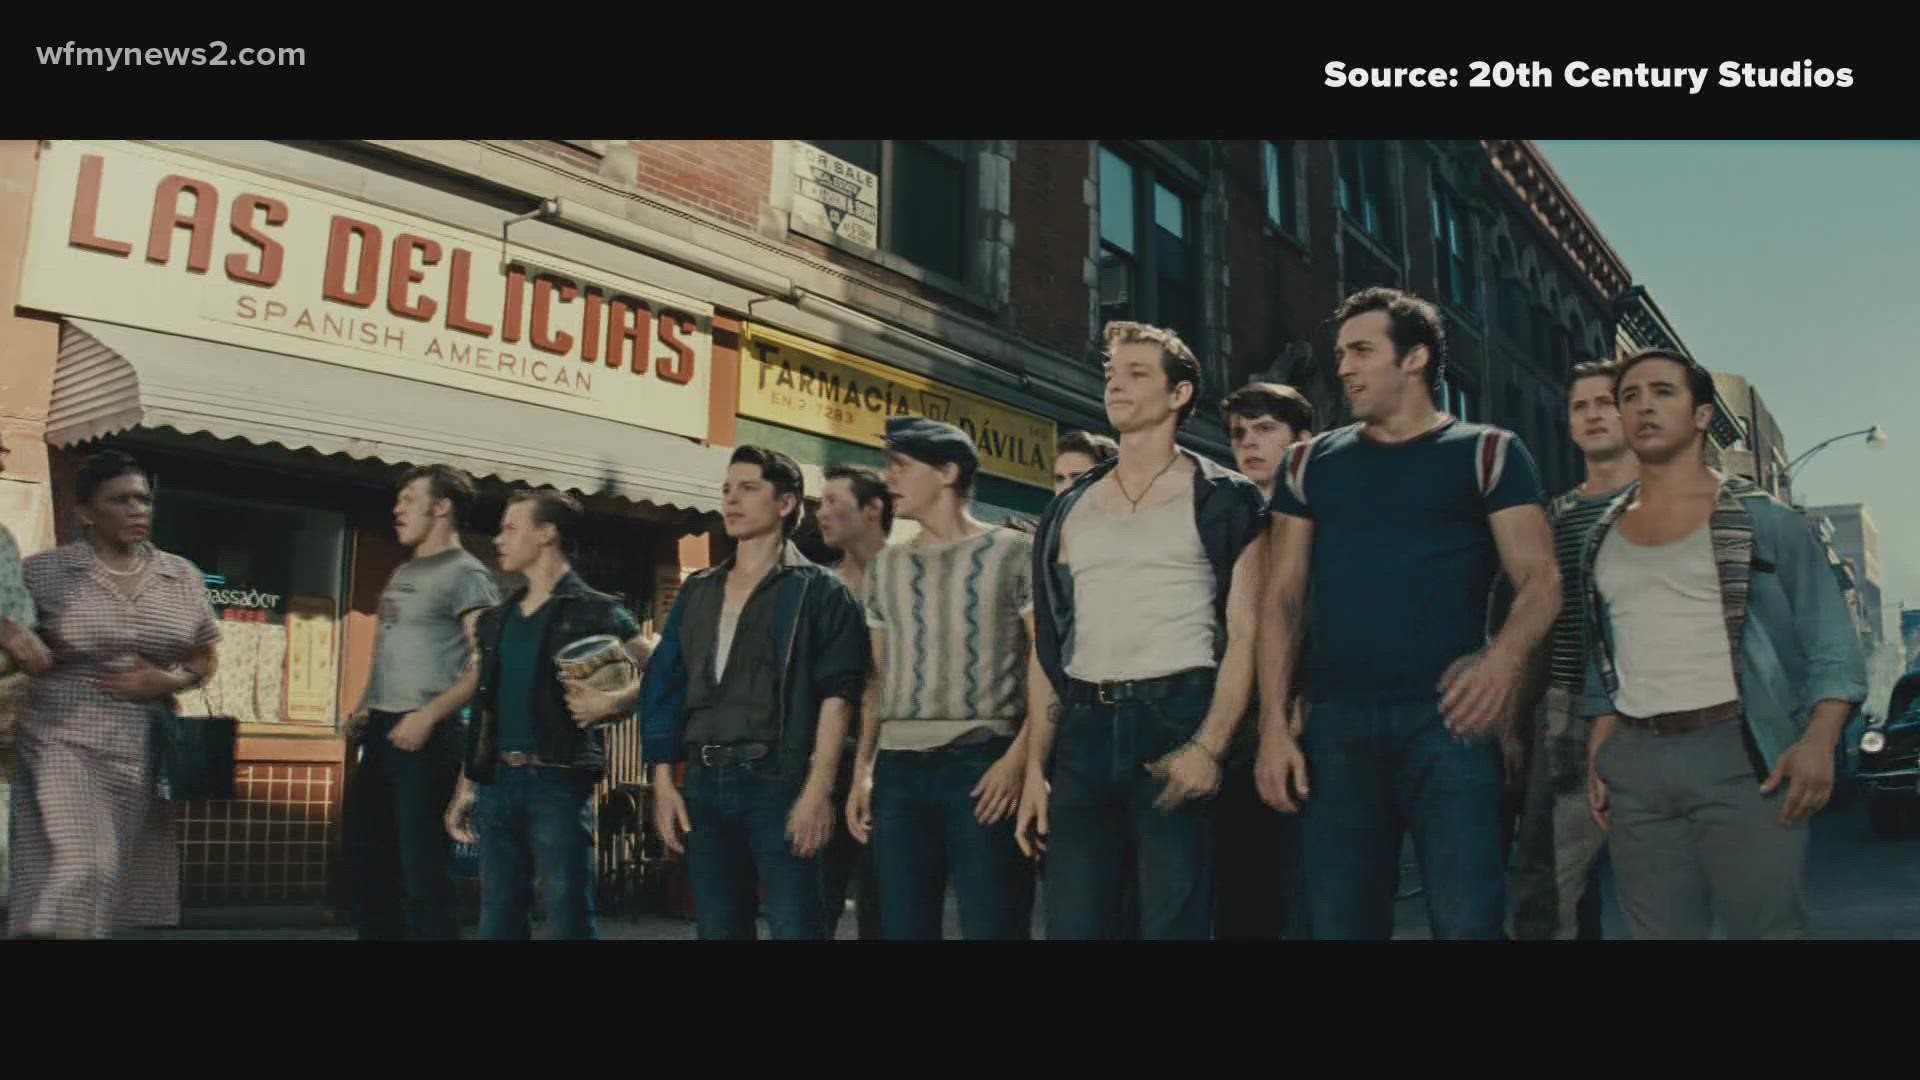 Steven Spielberg’s ‘West Side Story’ is a remake of the 1961 version.